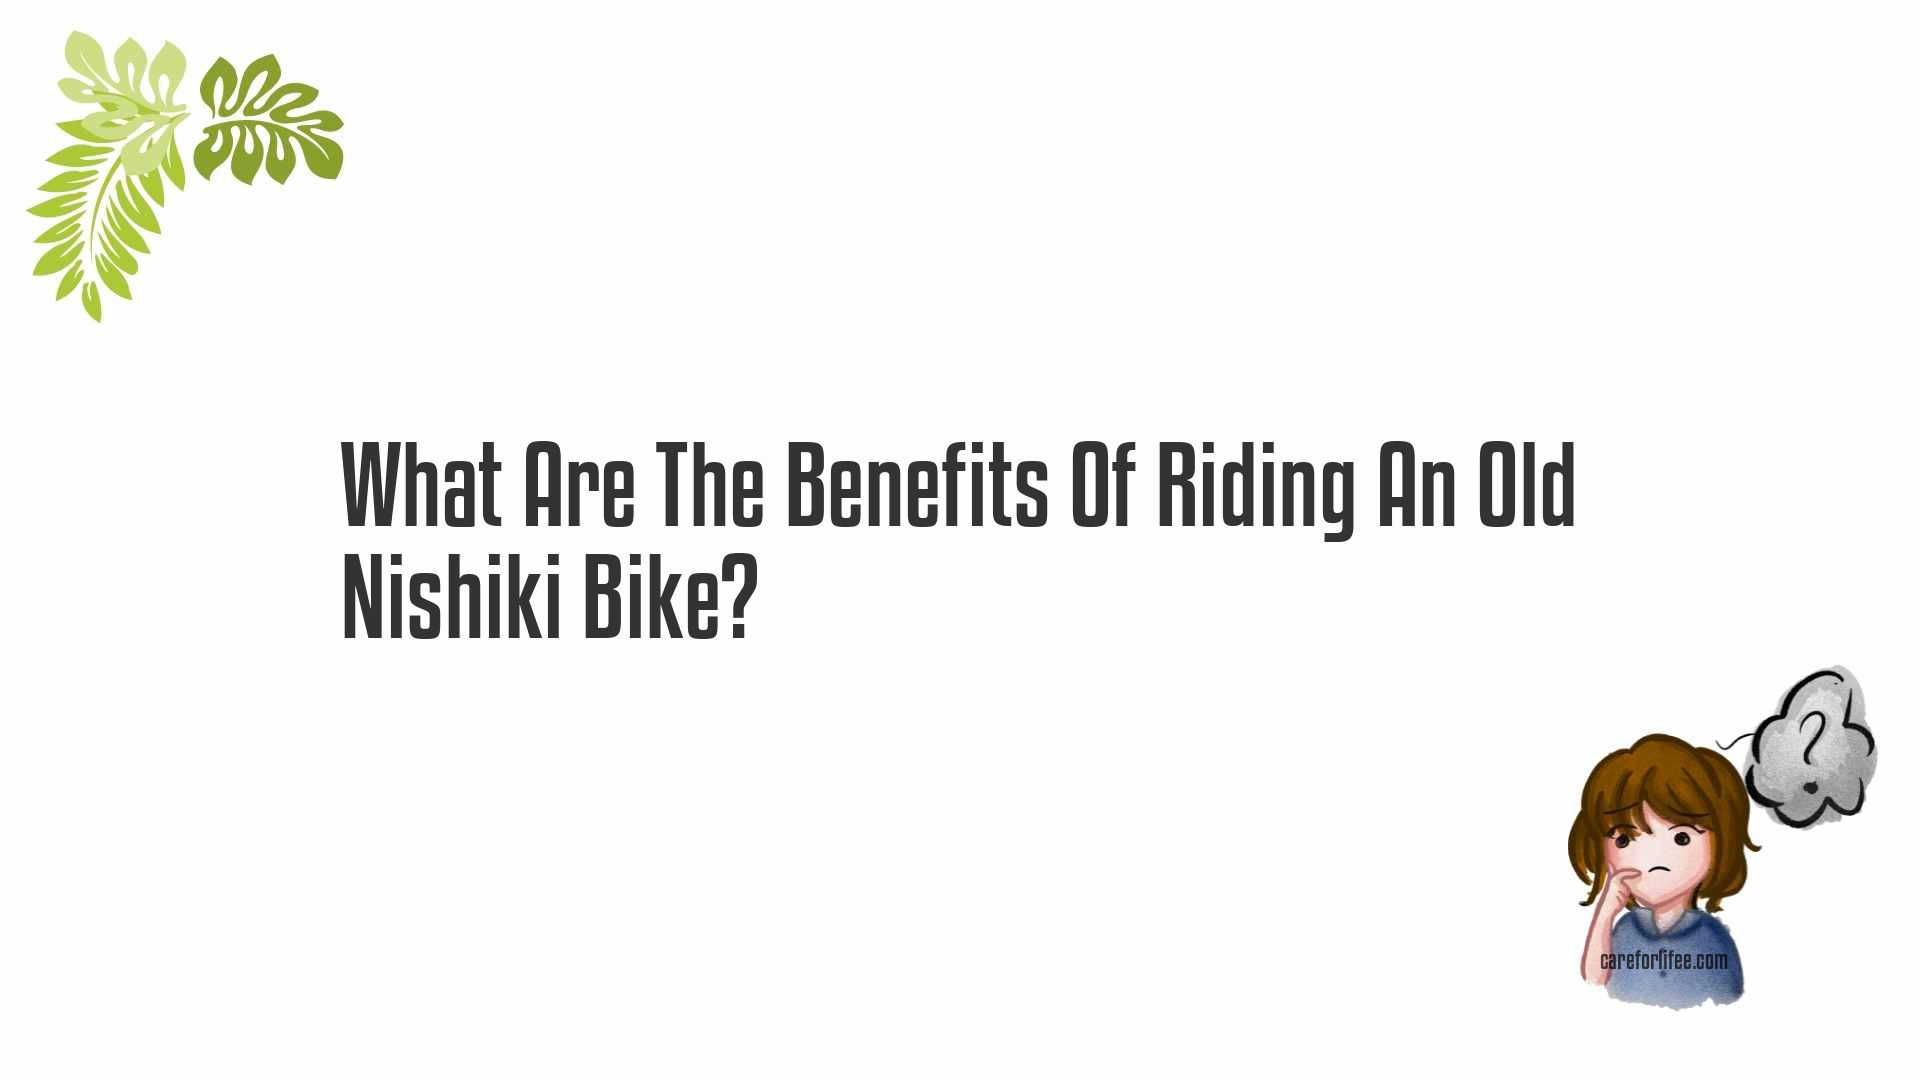 What Are The Benefits Of Riding An Old Nishiki Bike?